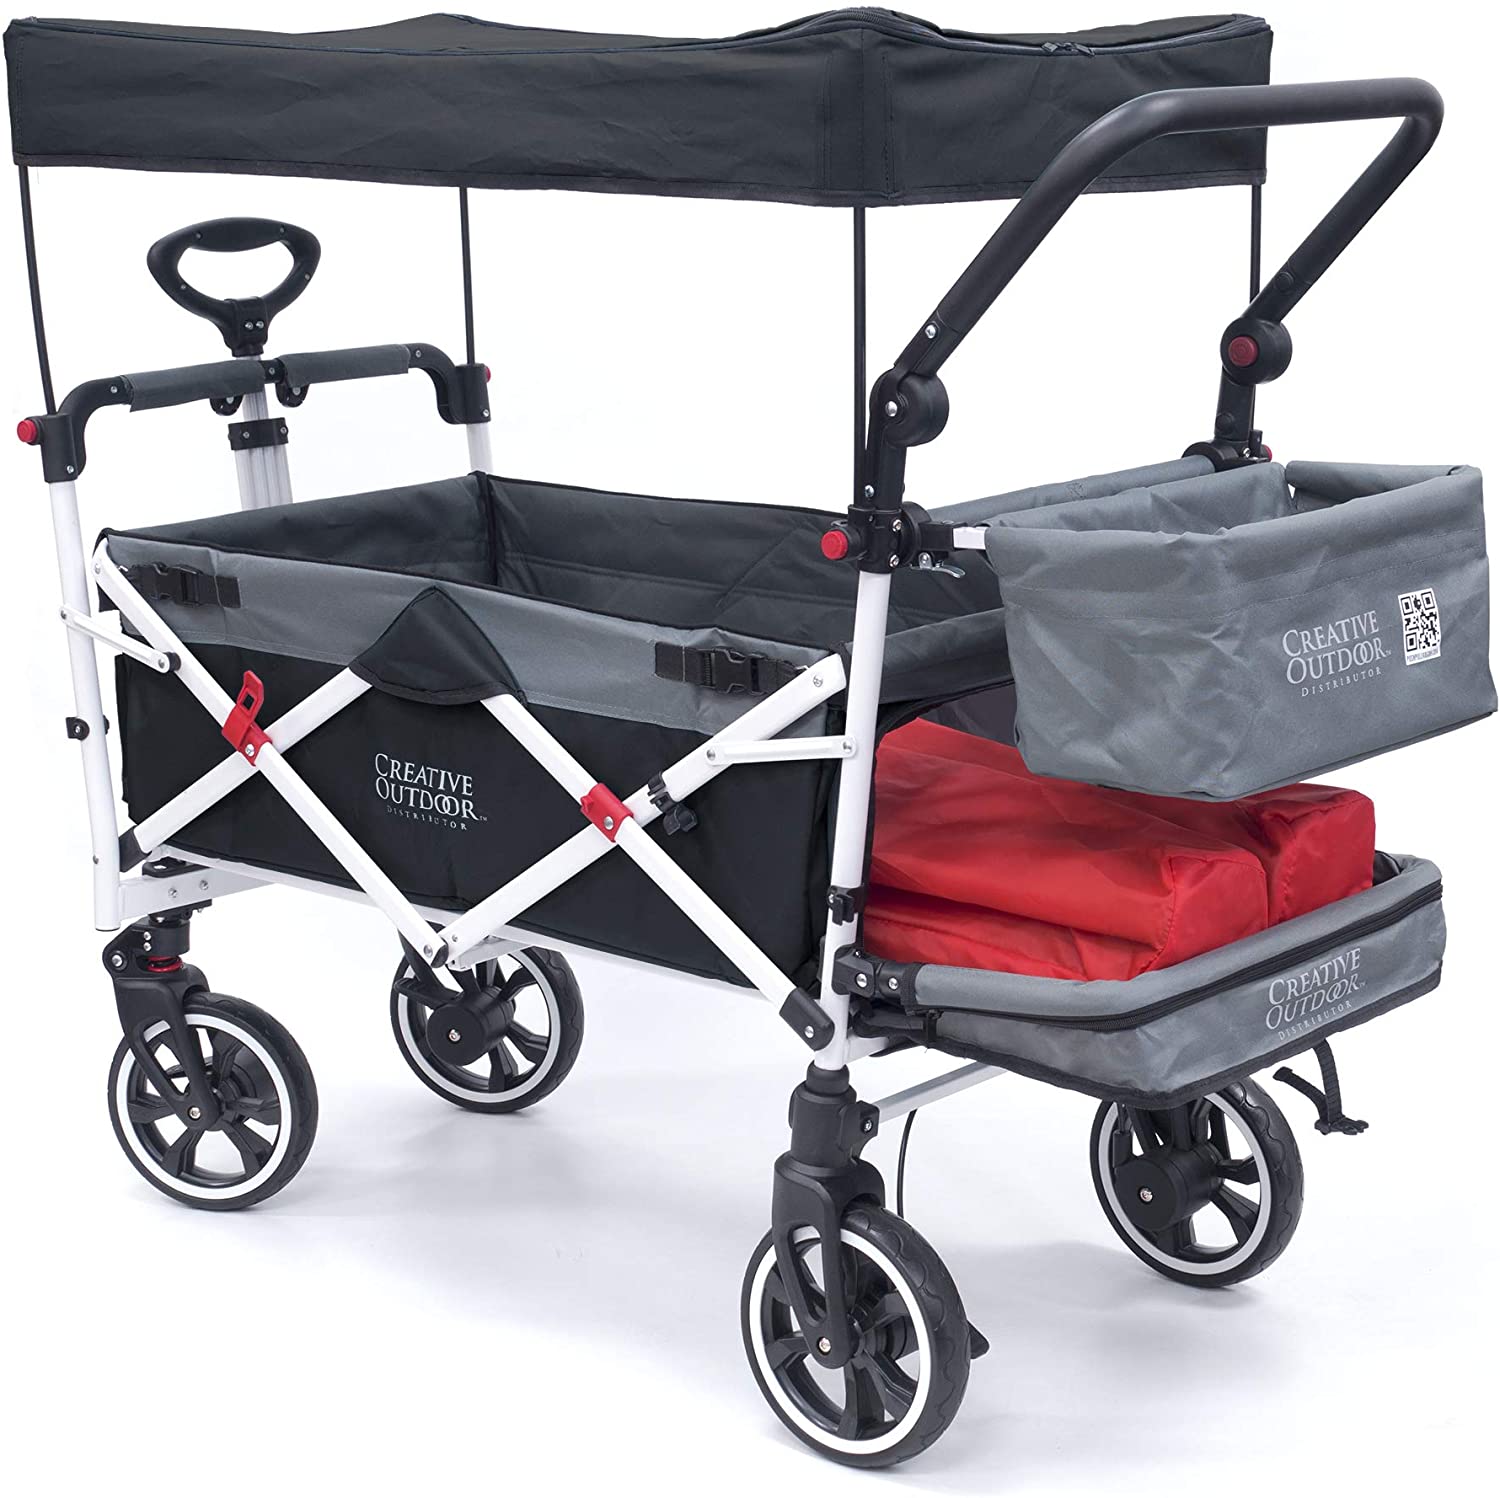 Creative Outdoor Push Pull Collapsible Folding Wagon 